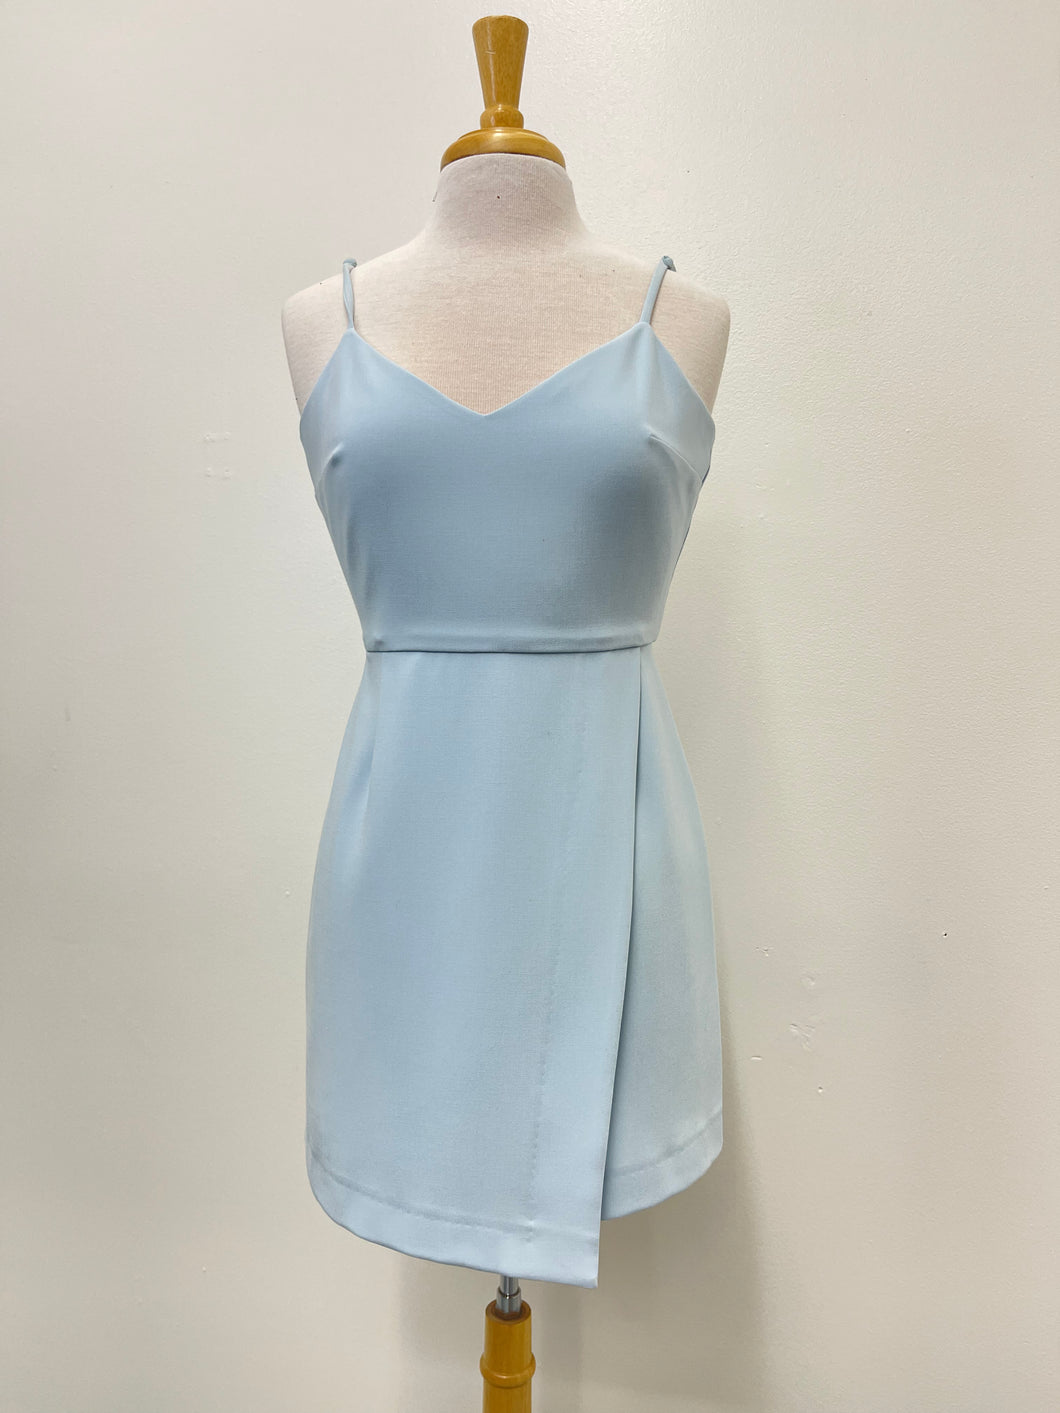 French Connection Light Blue Envelope Dress